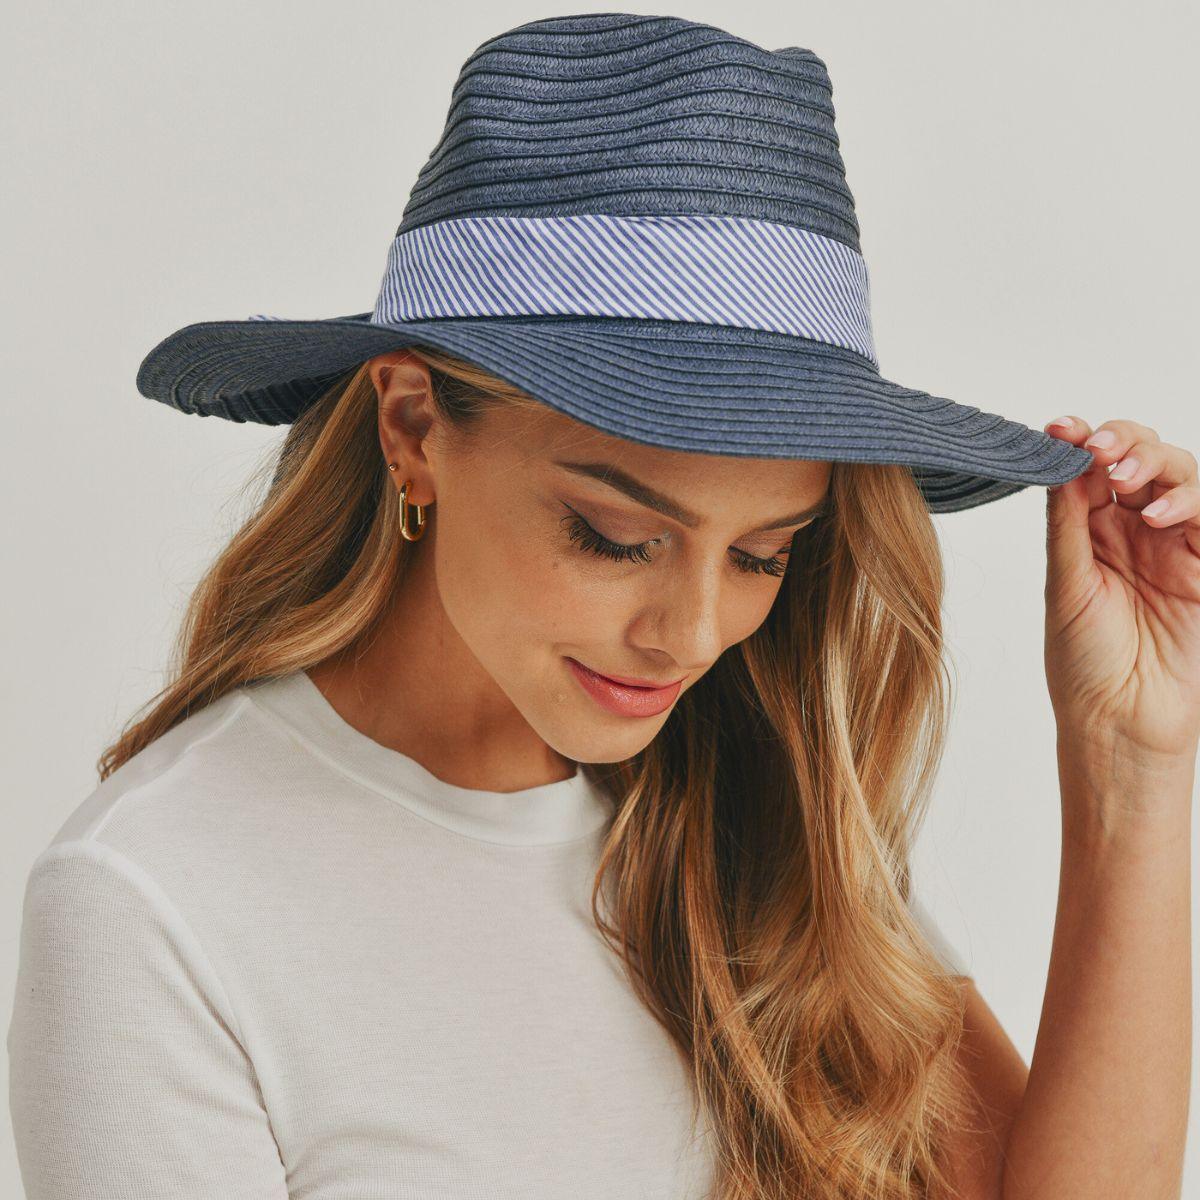 Stylish Straw Fedora Hat: Striped Bow Detail for Women - Shop Now!